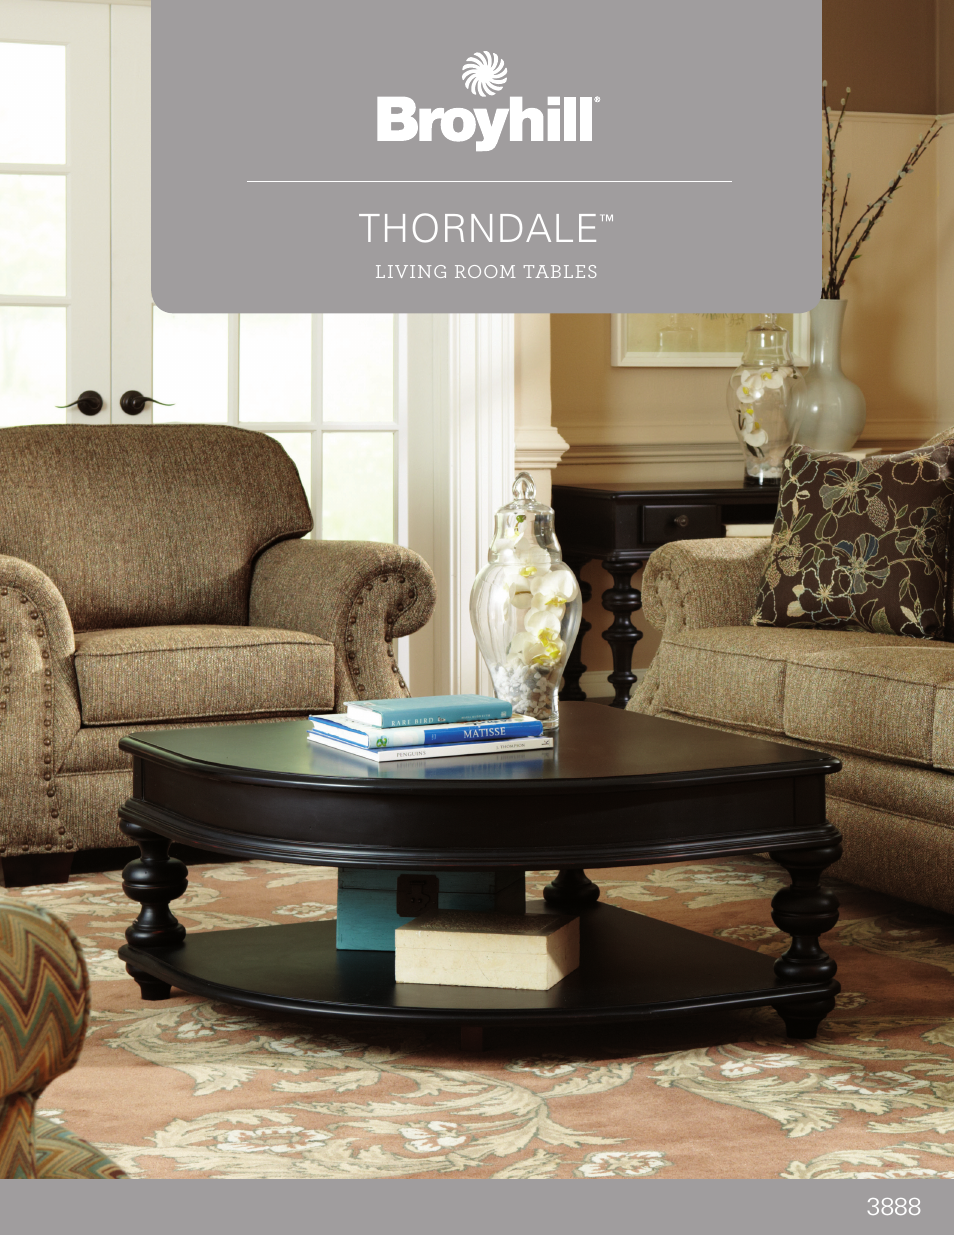 THORNDALE CHAIRSIDE CHEST Product Details